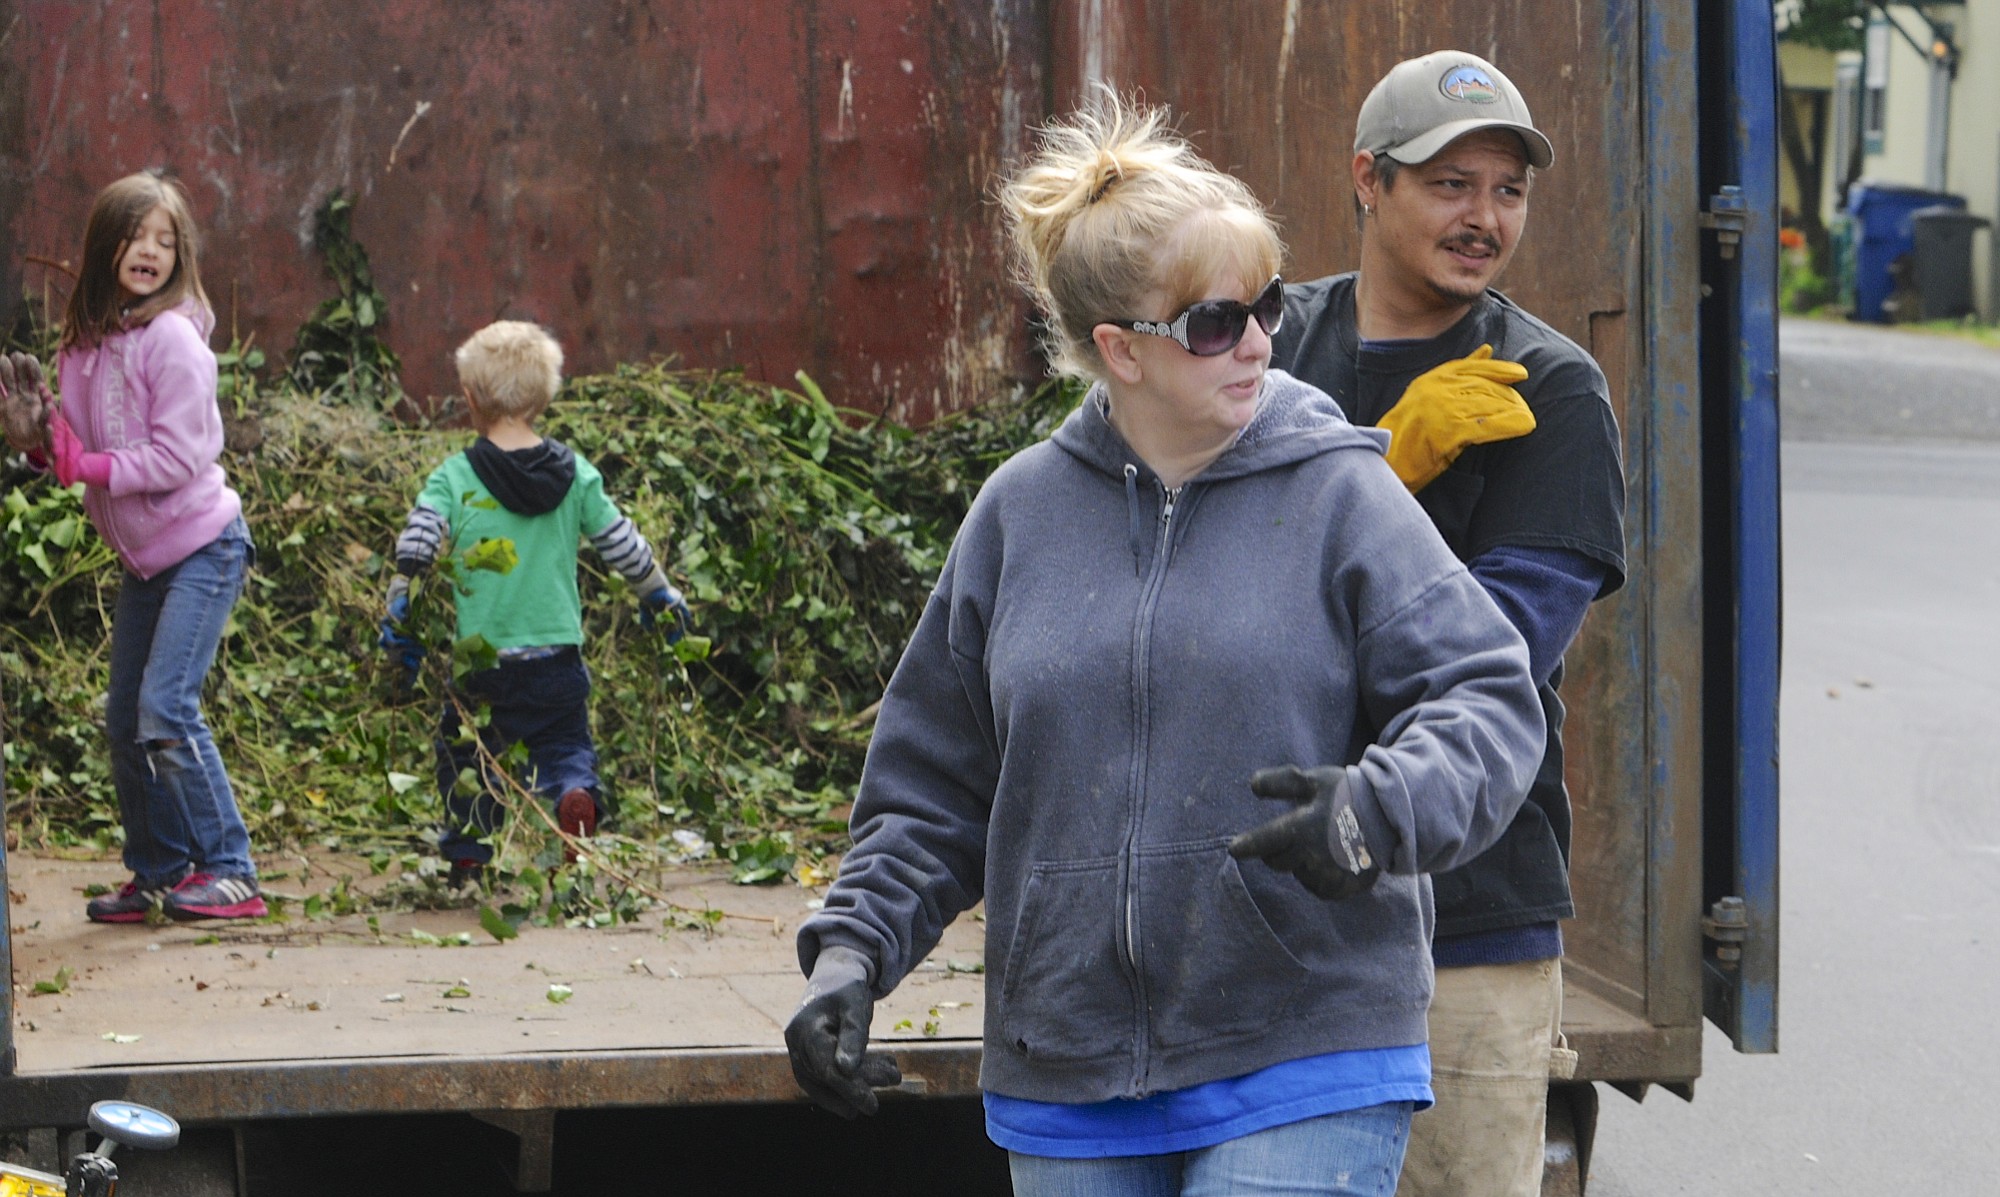 JP Simmons, right and Melissa Simmons, with James and Elizabeth Simmons at back, chat with a neighbor as they work on a yard cleanup at her father's house in Vancouver, Wa., Saturday June 14, 2014.